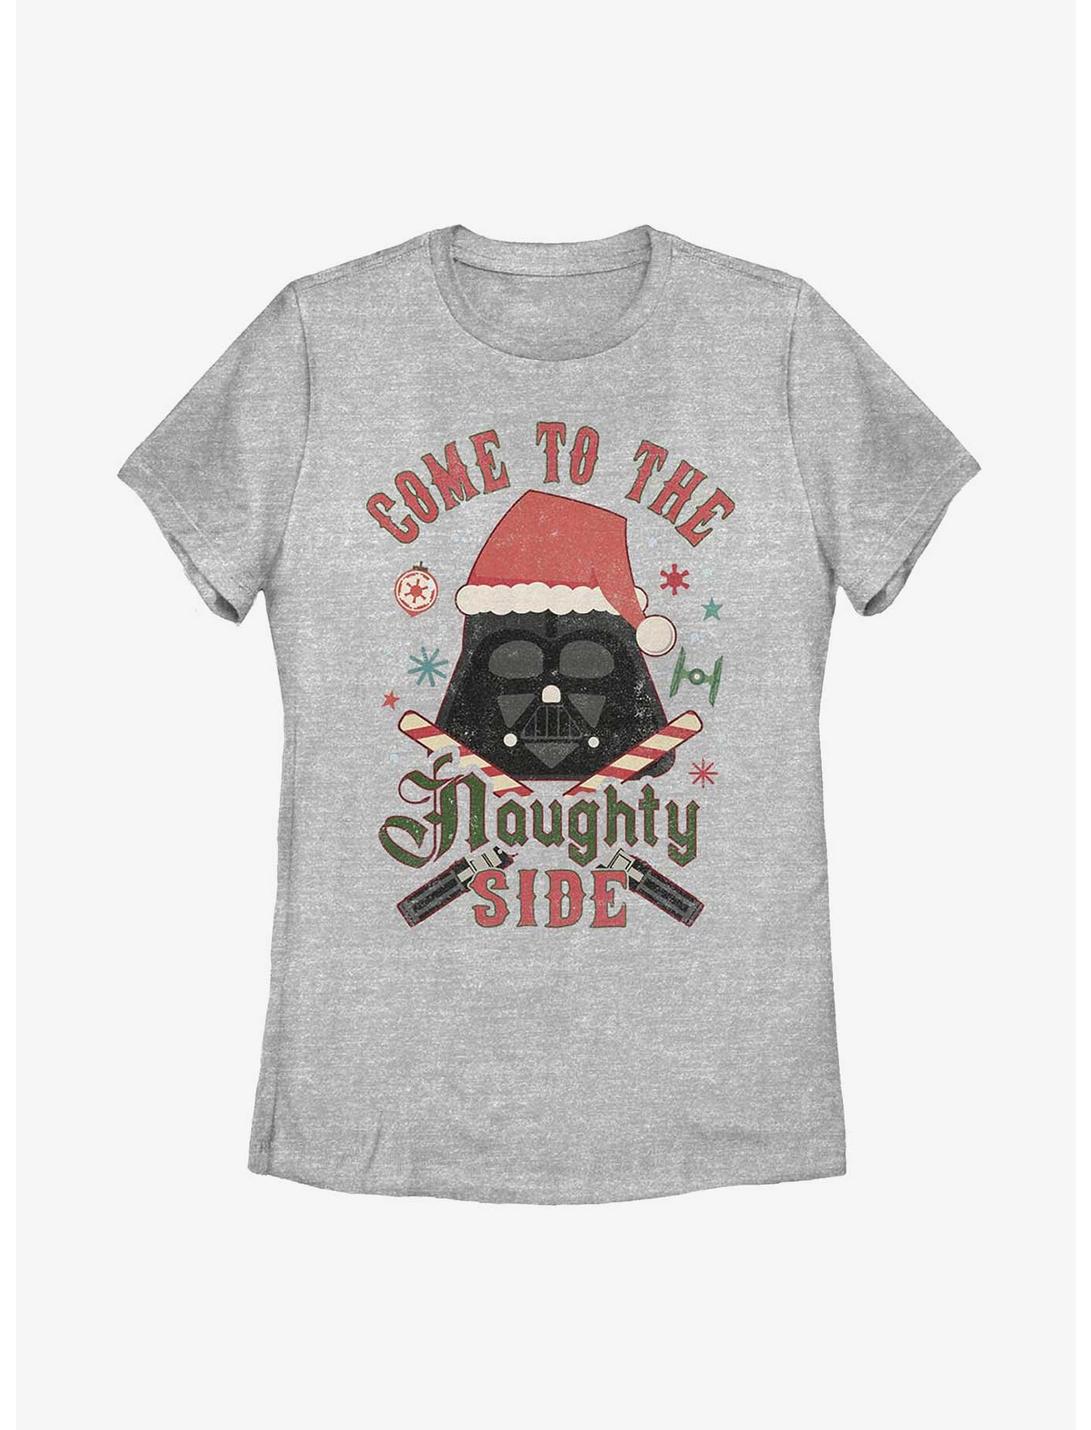 Star Wars Come To The Naughty Side Womens T-Shirt, ATH HTR, hi-res